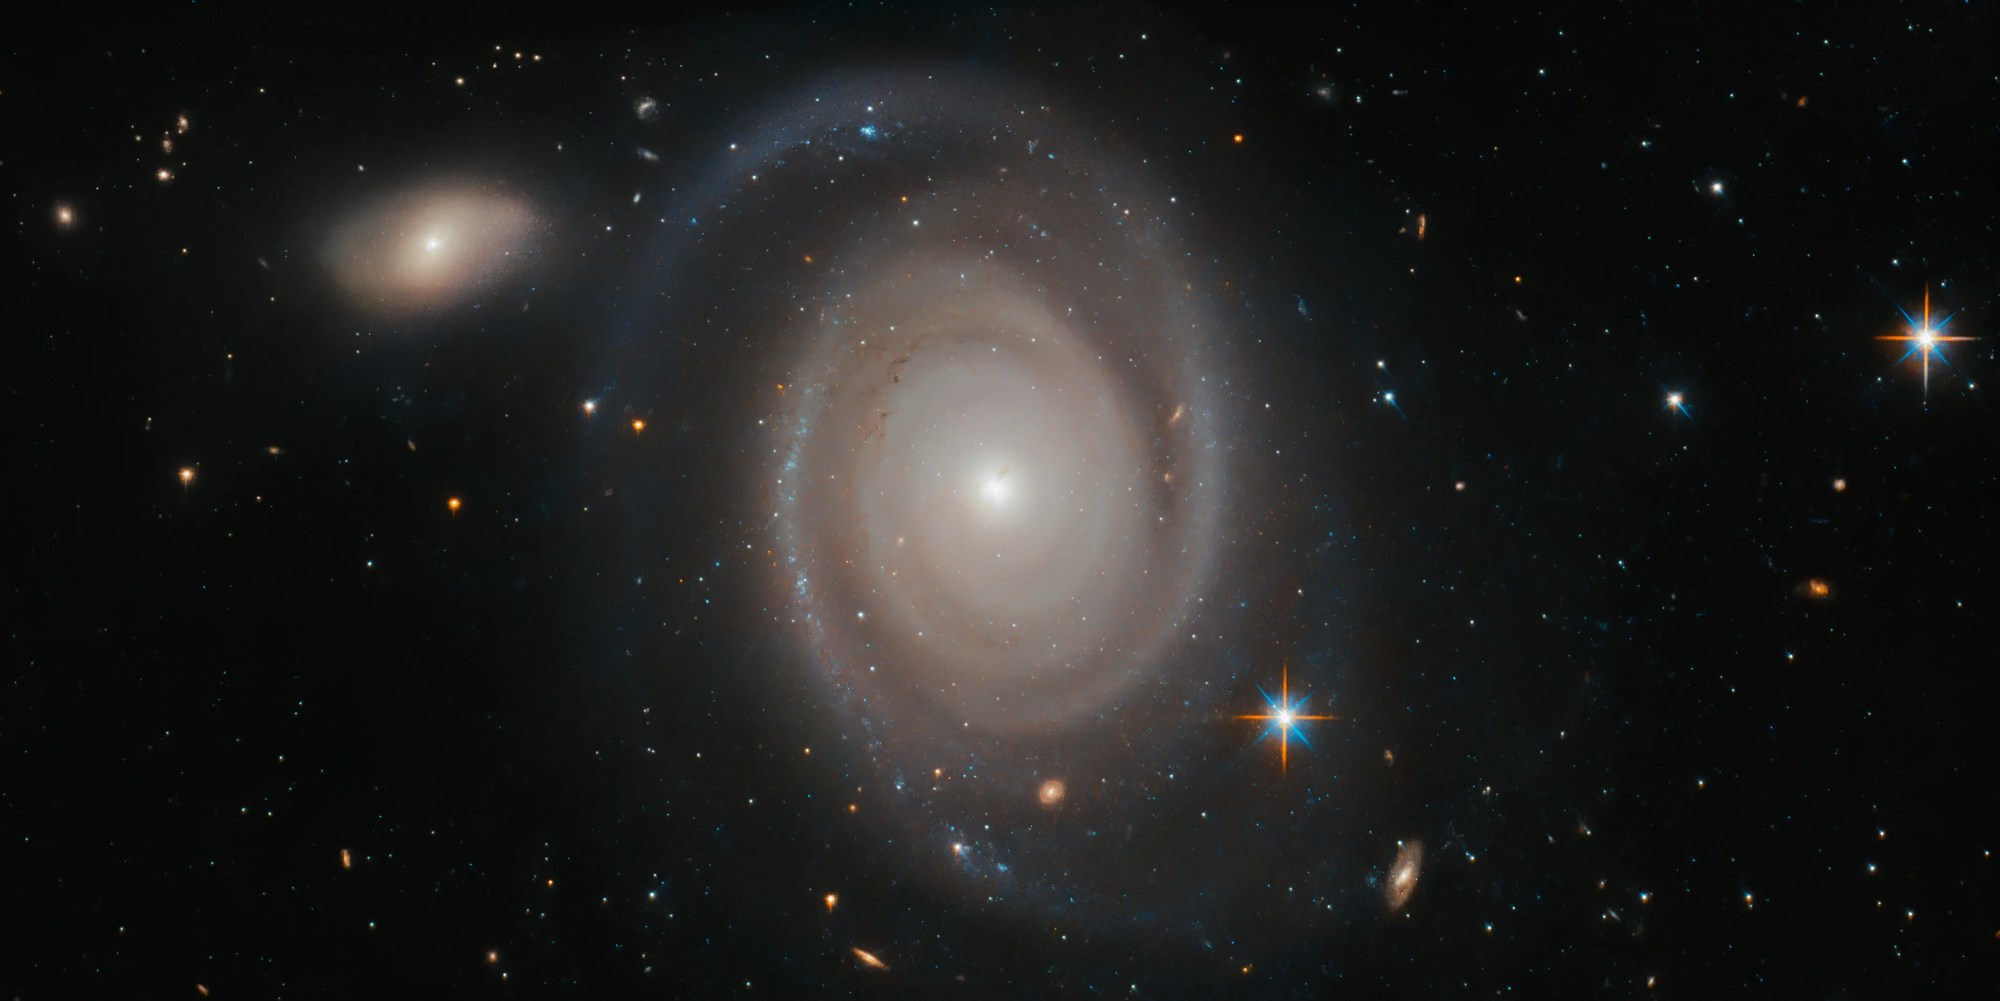 Hubble image of the ngc 1706 spiral galaxy